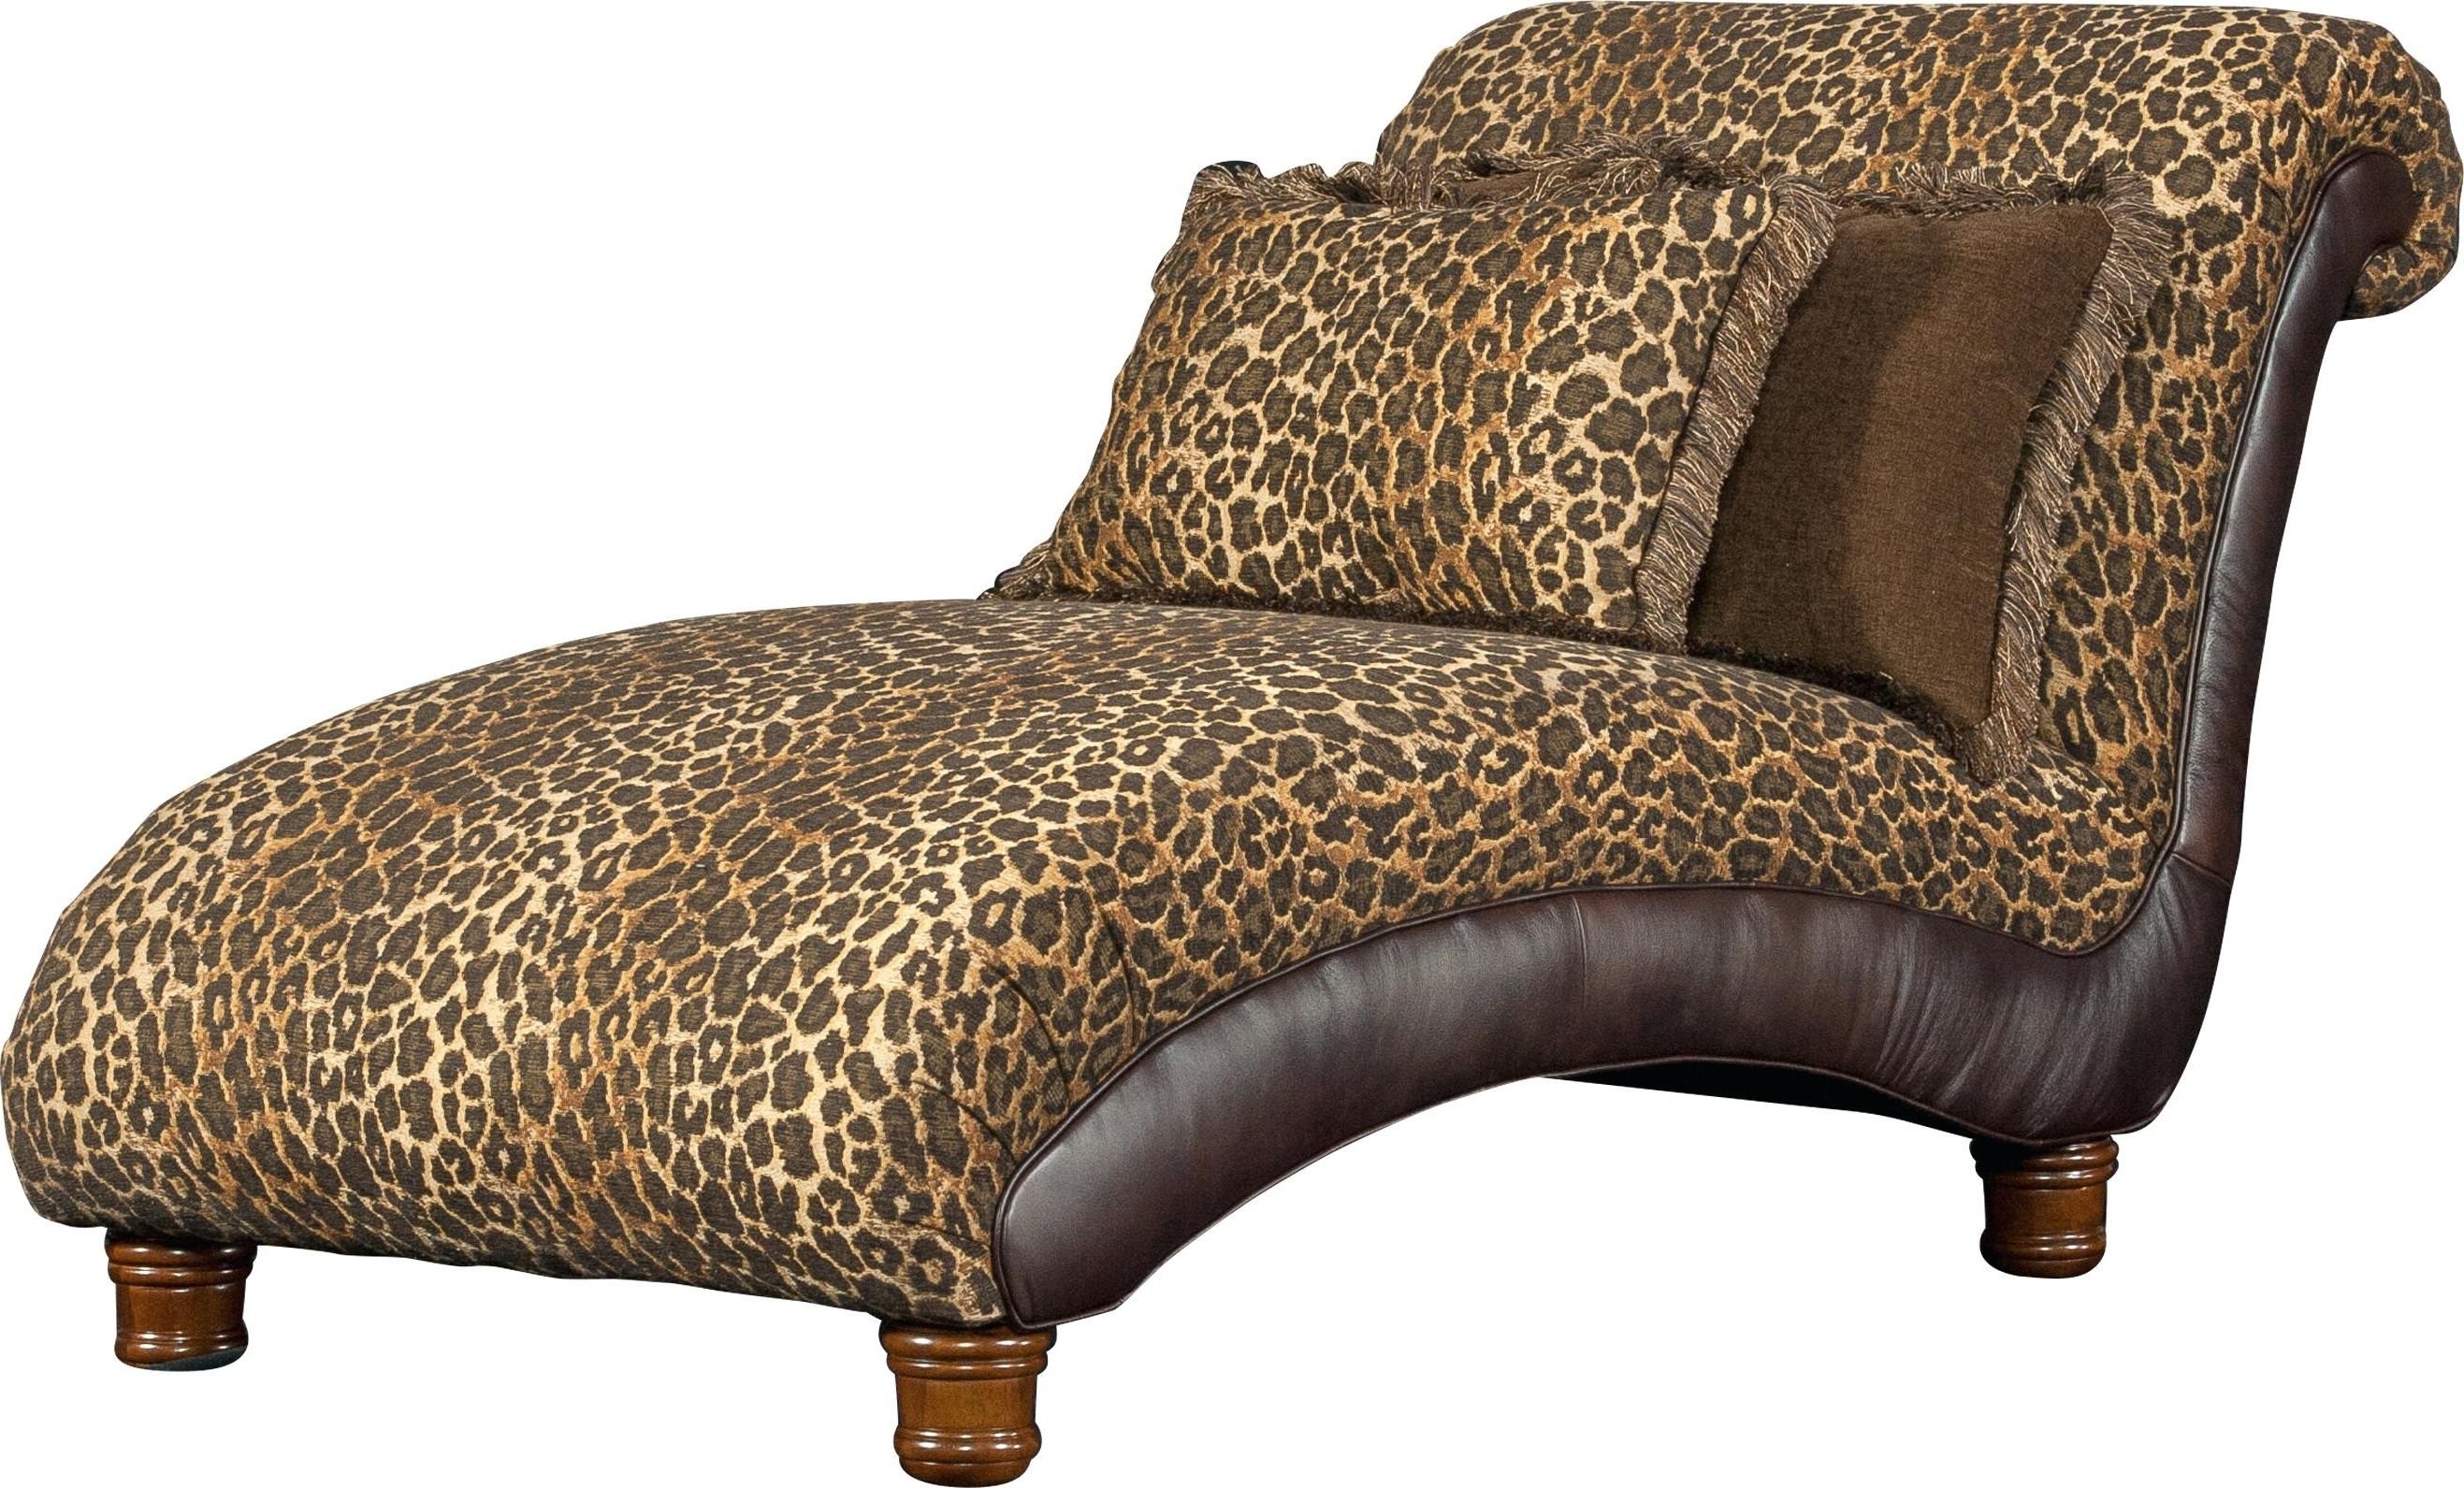 Reviravoltta With 2017 Leopard Print Chaise Lounges (View 12 of 15)